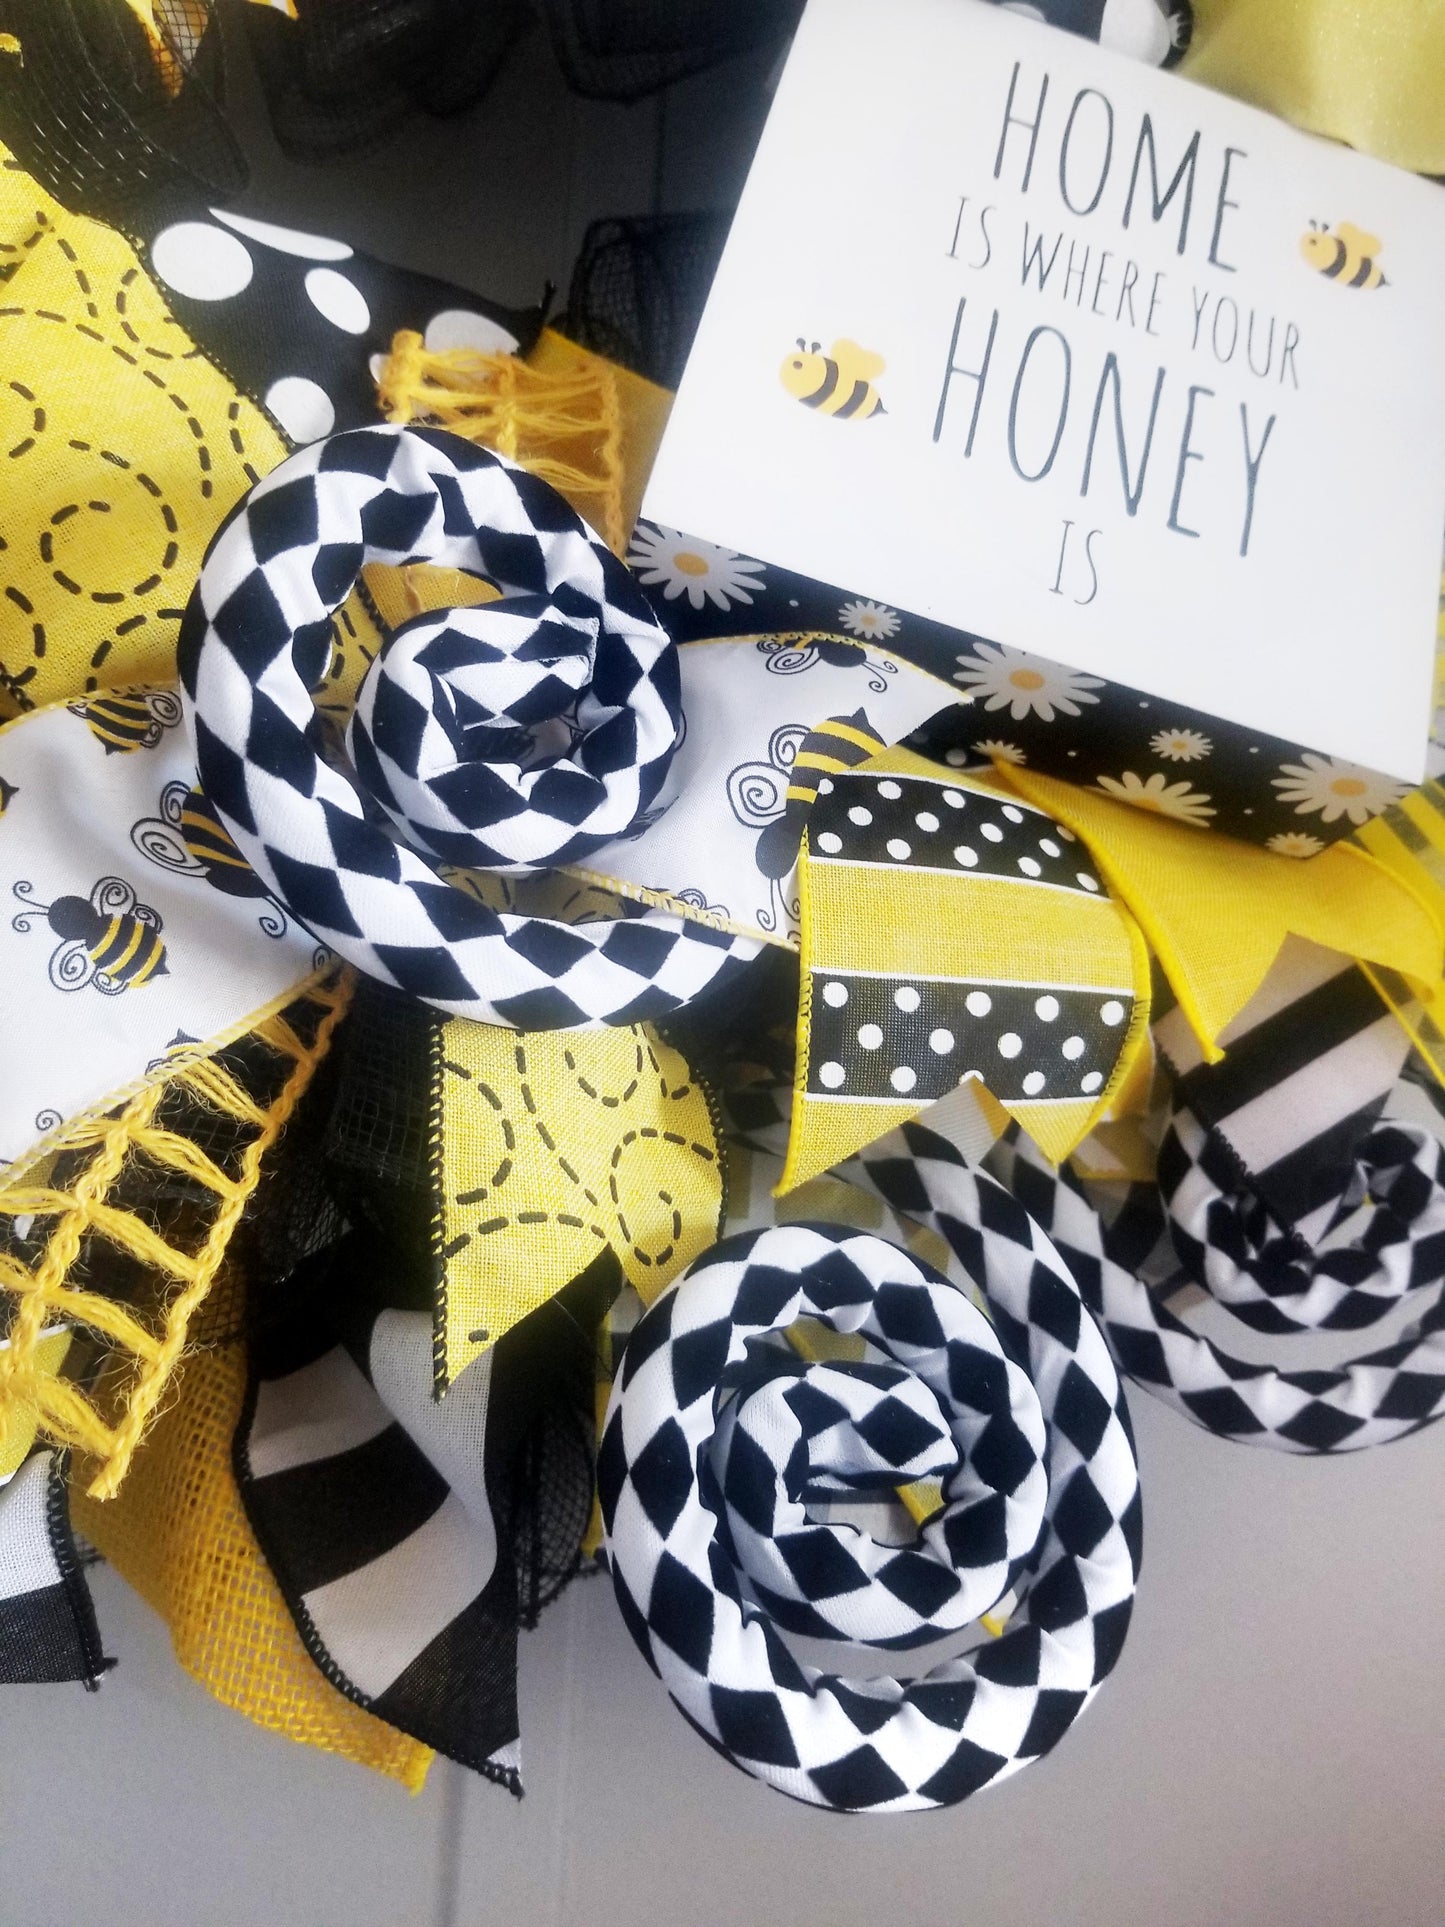 Summer Wreath | Home is Where Your Honey Is - Designer DIY